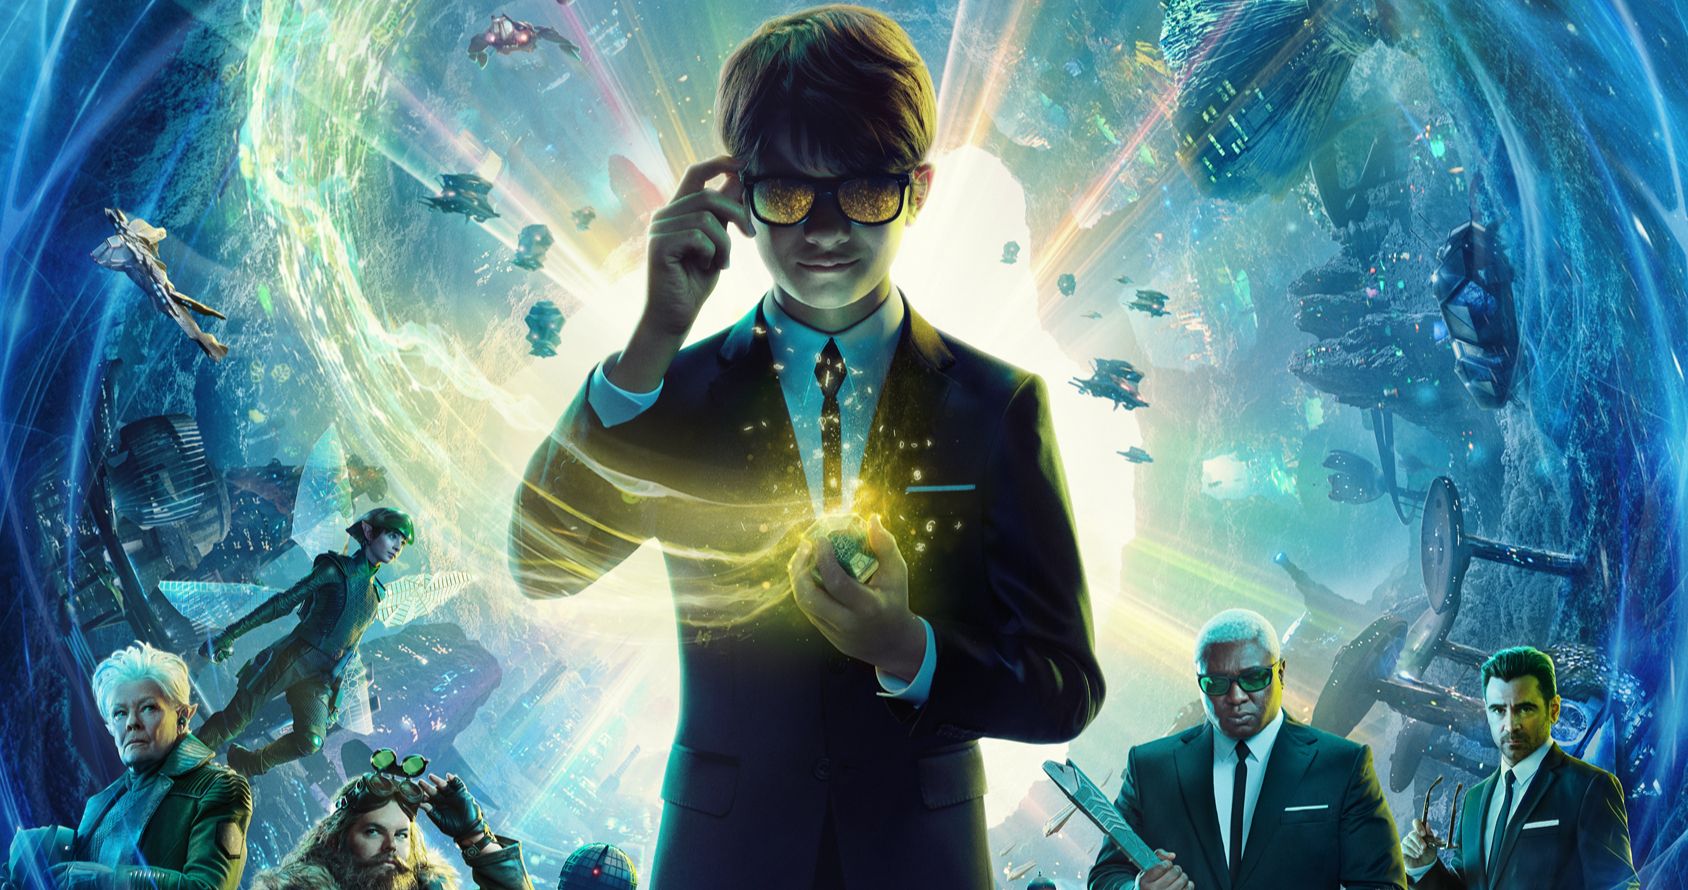 Artemis Fowl Trailer #2 Brings the 12-Year-old Criminal Mastermind to Life